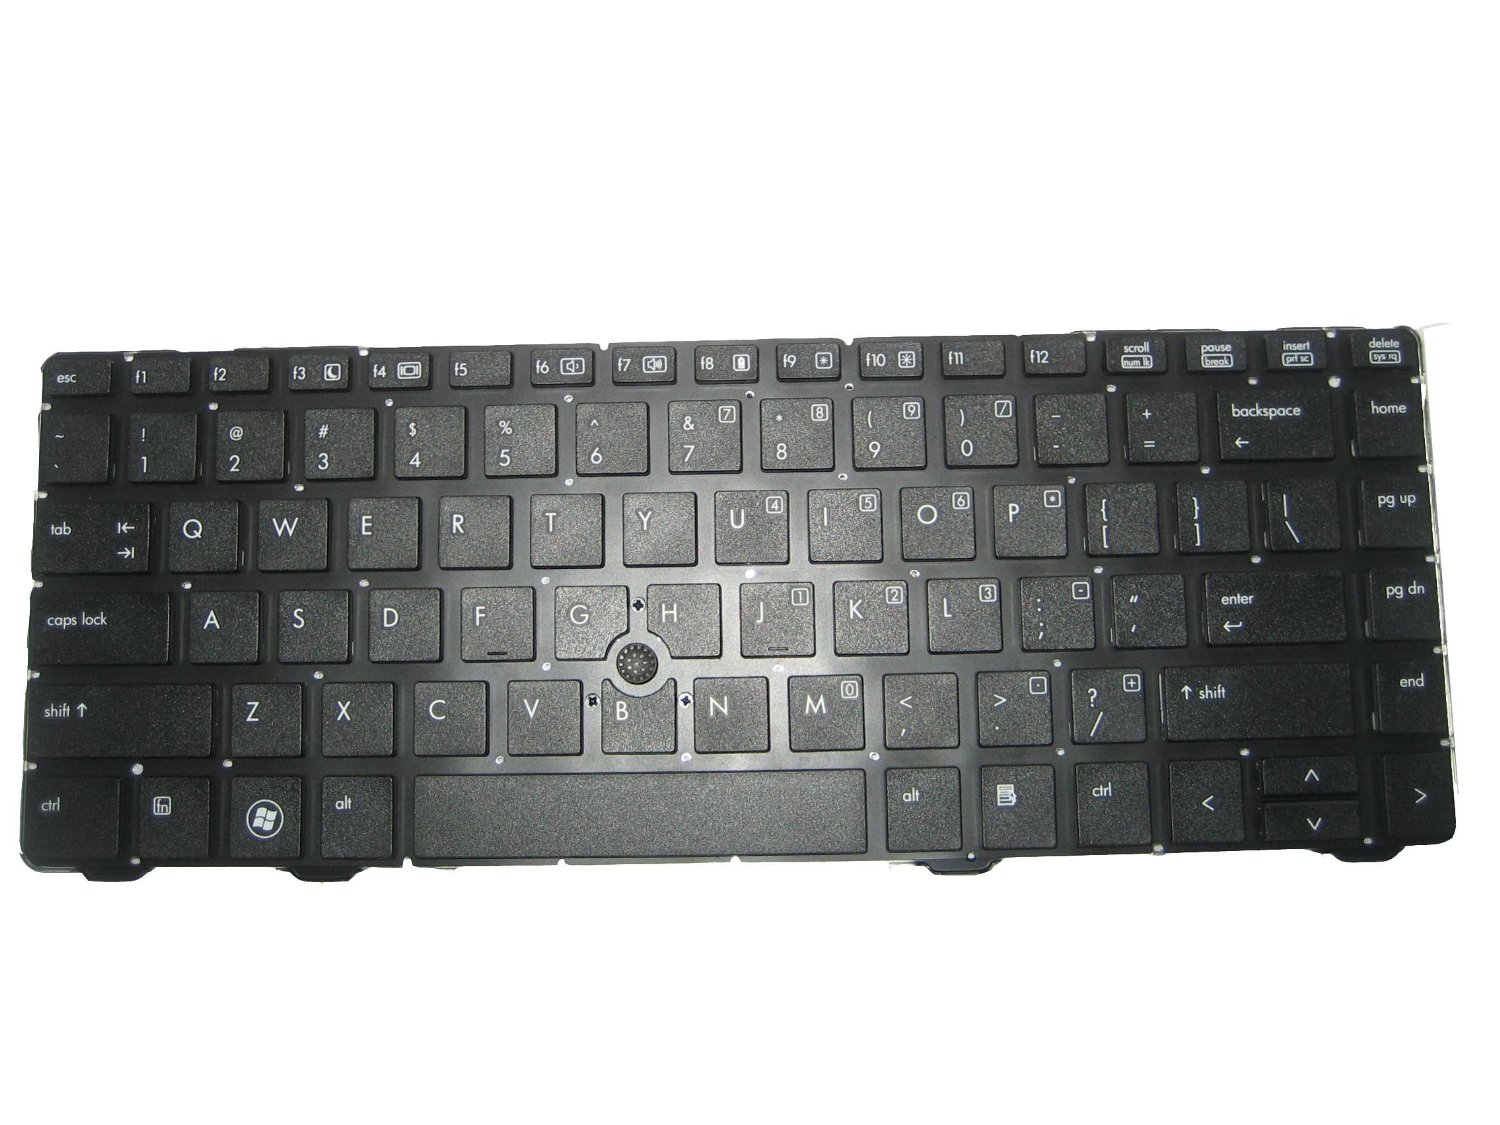 LotFancy New Black keyboard without Frame (with pointer) for HP ProBook 6460B 6465B Elitebook 8460P 8460W , fit part numbers 9Z.N6RSV.A01 NSK-HZASV 01 683833-001 6037B0066401 684332-001 Laptop / Notebook US Layout